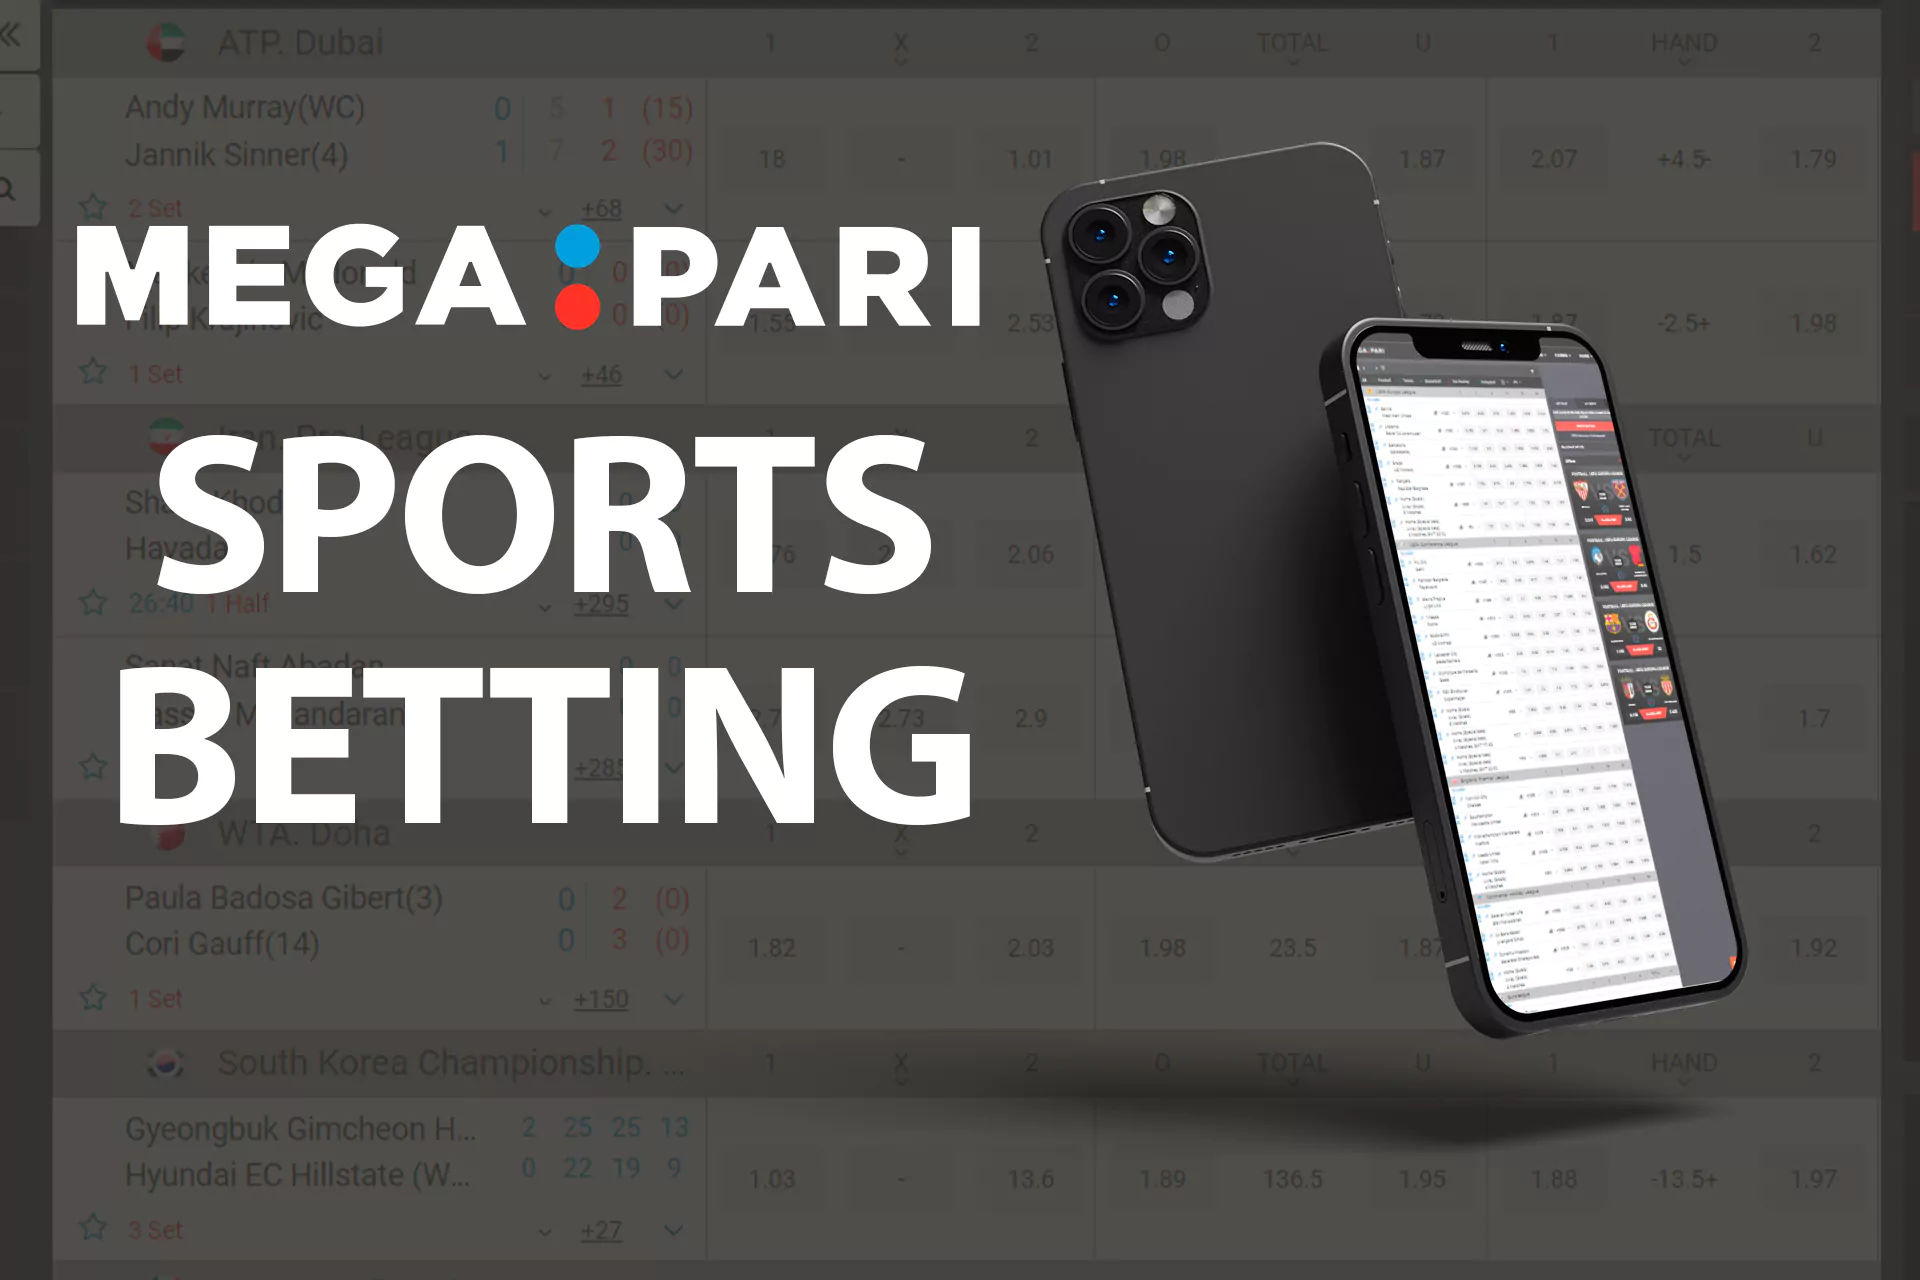 Choose your favorite sport and bet on it on the Mega Pari app.